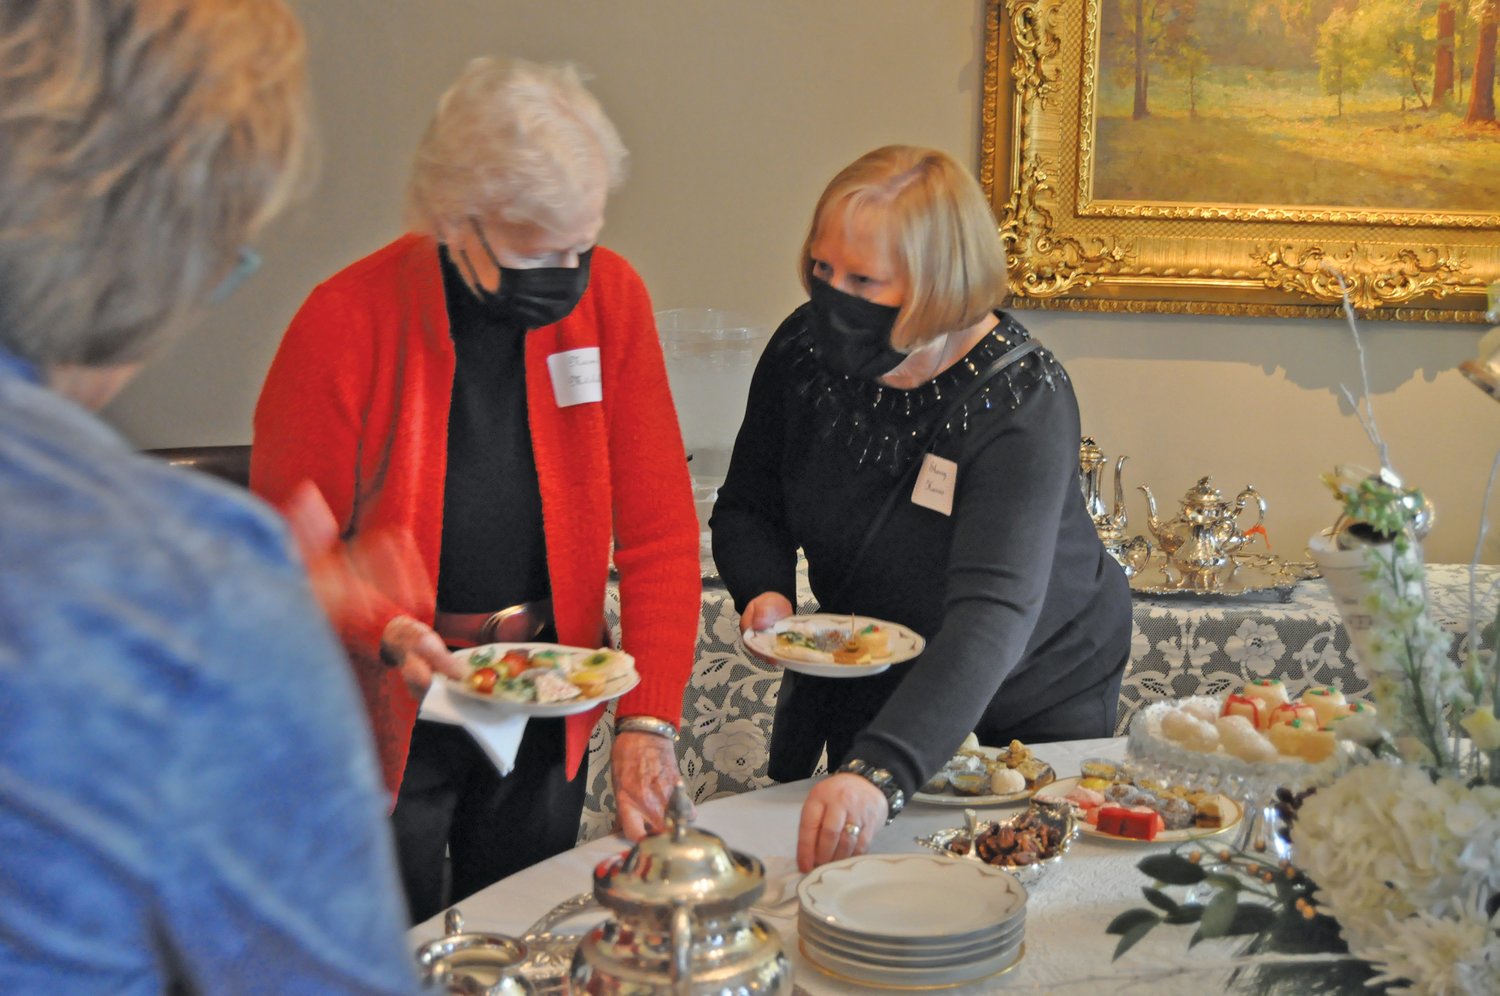 Sherry Harris, right, and her guests leave the refreshment table at the Sounds of the Season Holiday Tea & Fashion Show at the Elston Homestead. The annual event is a fundraiser for the General Lew Wallace Study & Museum.